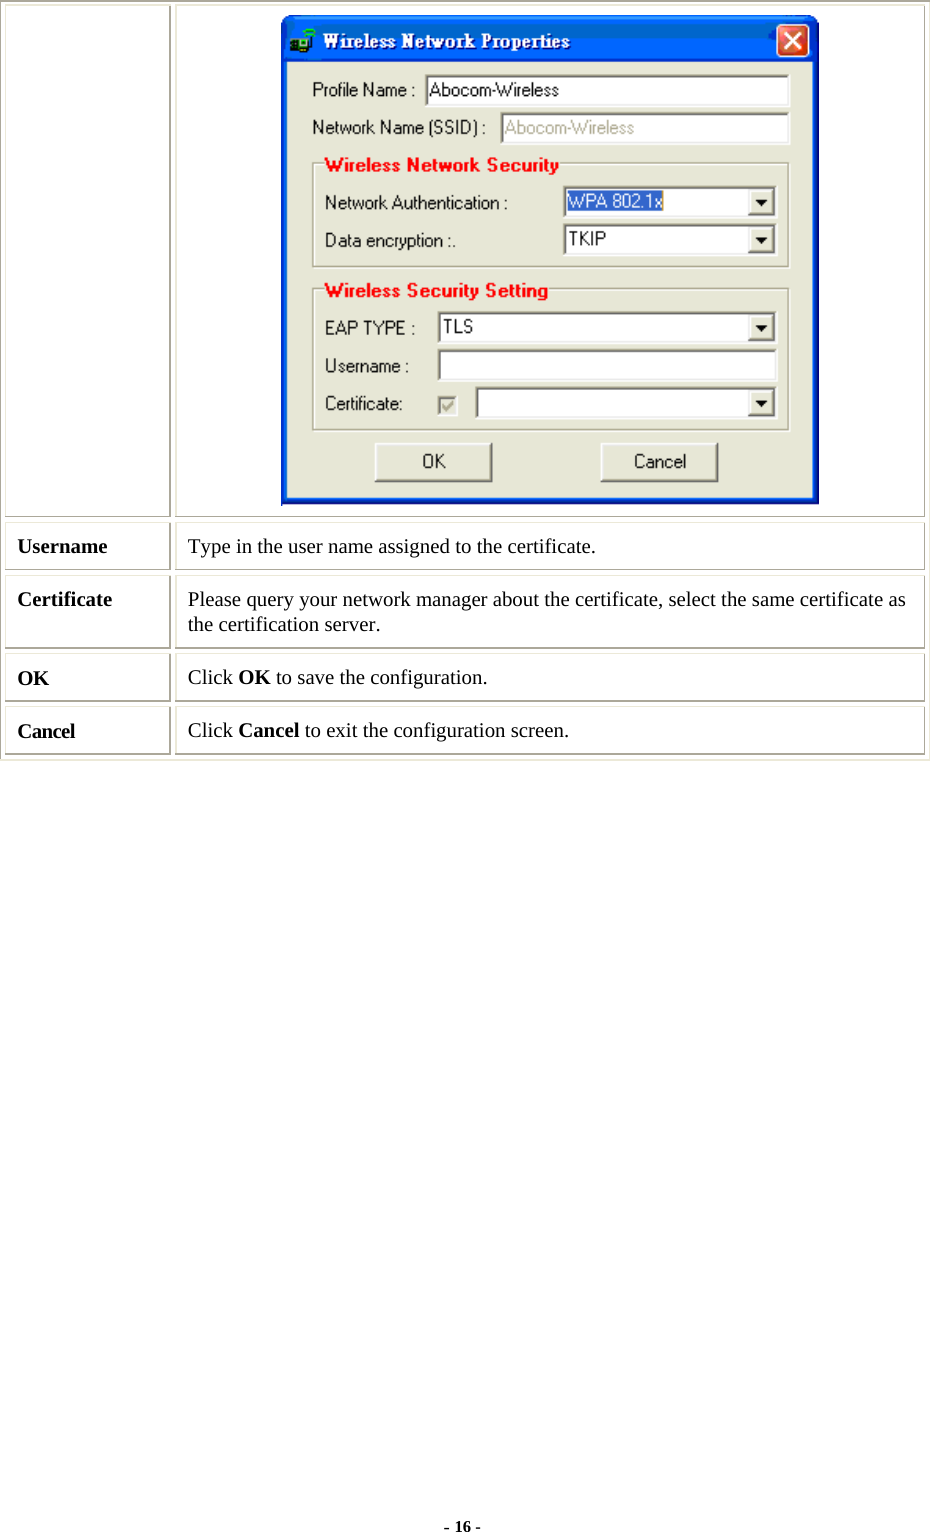  - 16 -  Username  Type in the user name assigned to the certificate. Certificate  Please query your network manager about the certificate, select the same certificate as the certification server. OK  Click OK to save the configuration. Cancel  Click Cancel to exit the configuration screen.                 